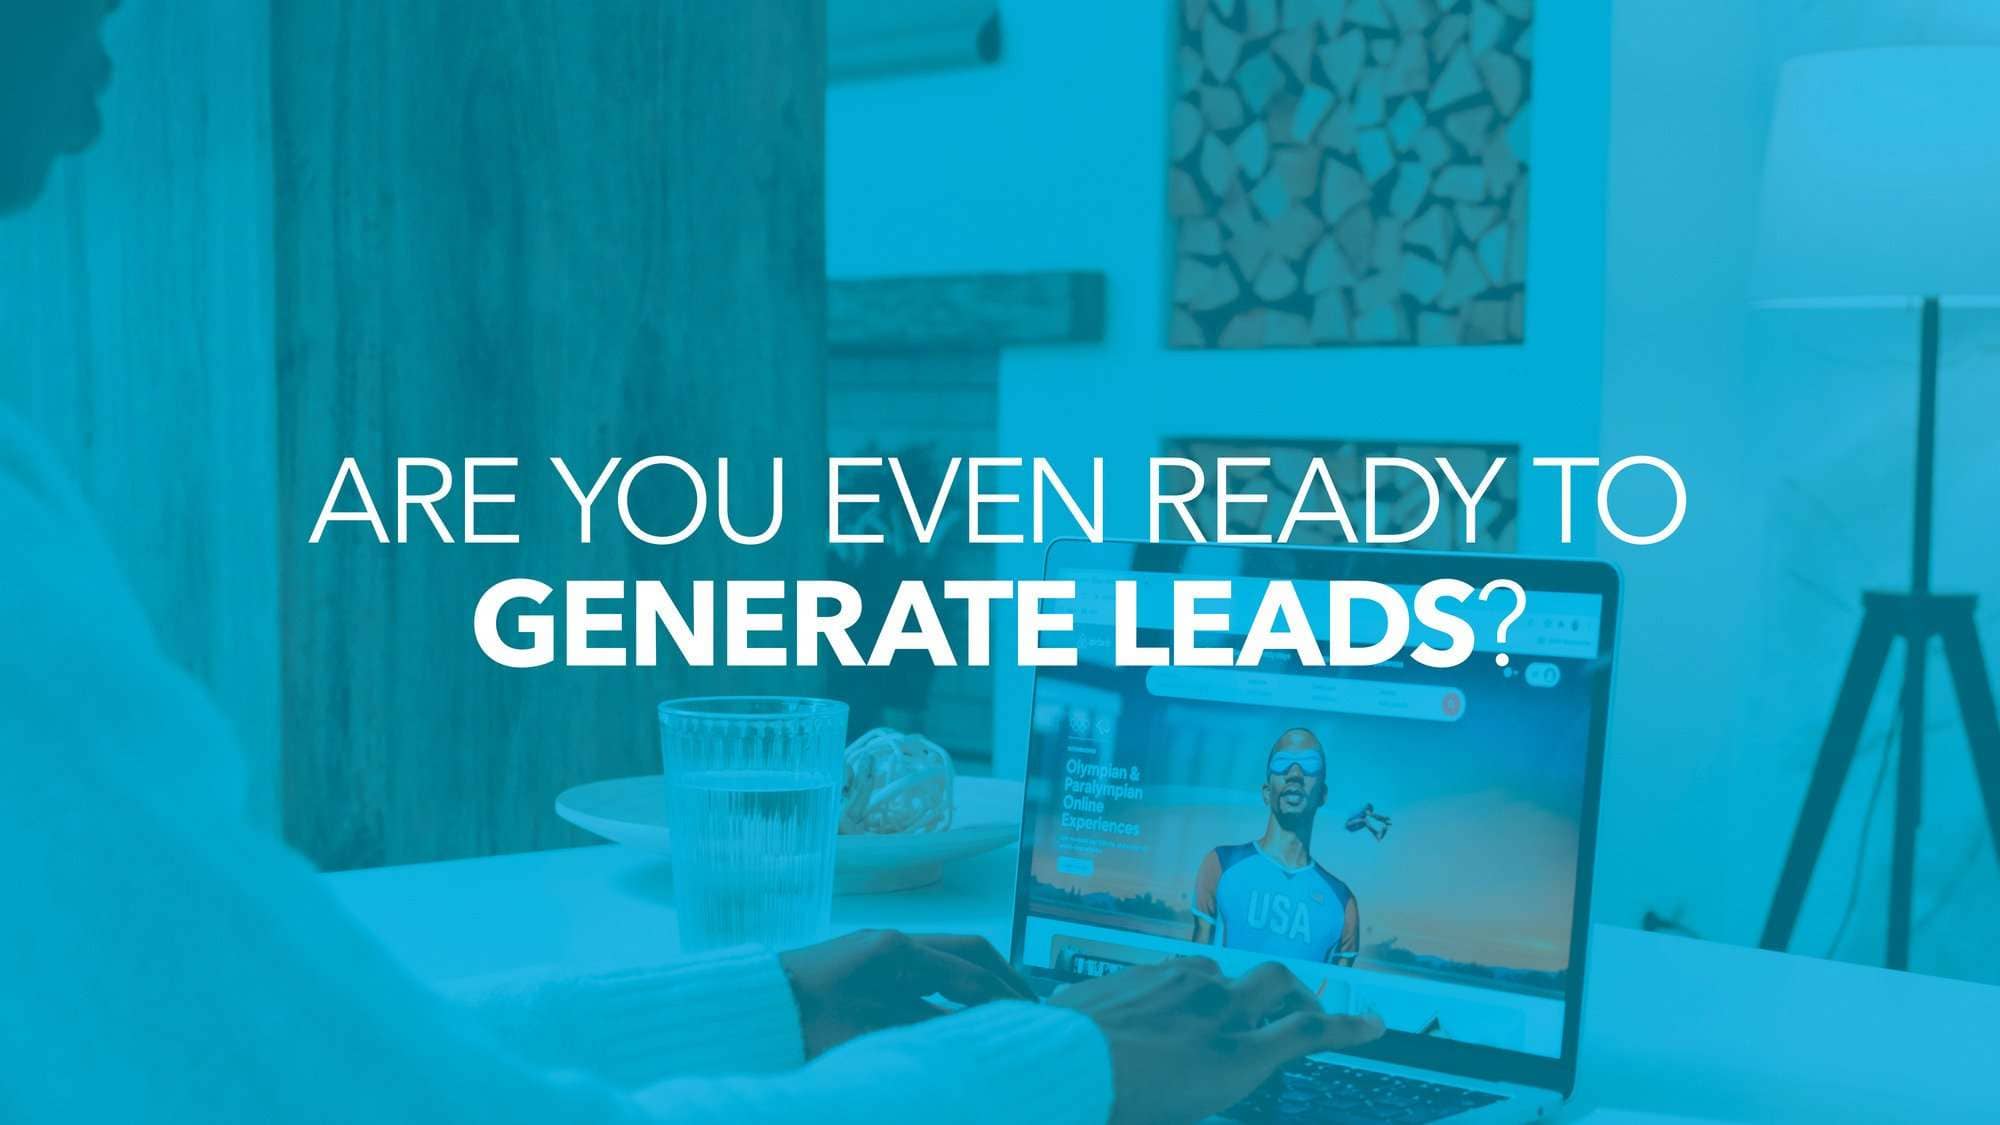 Are you ready for lead generation?